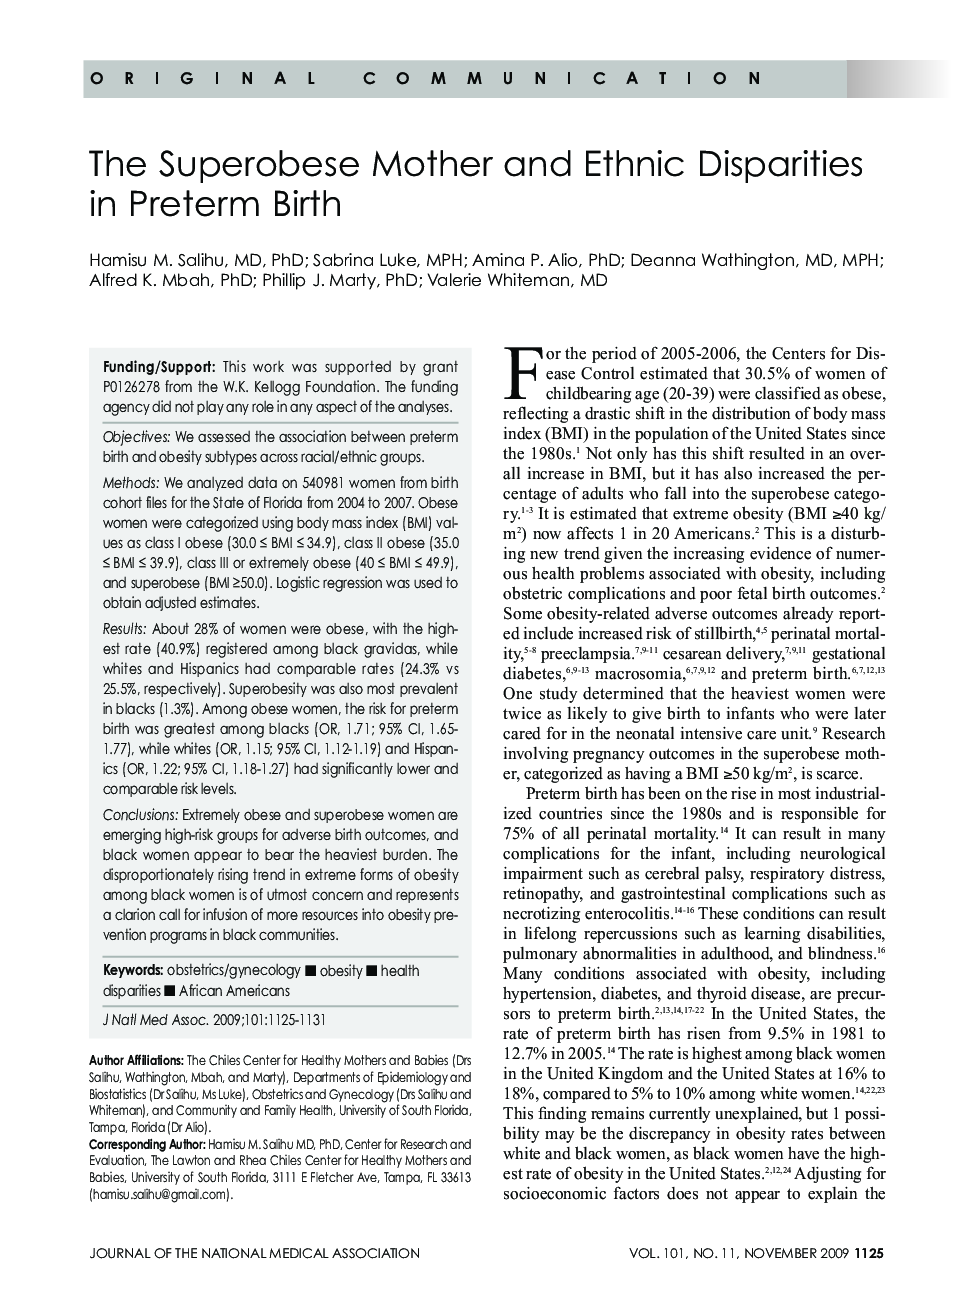 The Superobese Mother and Ethnic Disparities in Preterm Birth